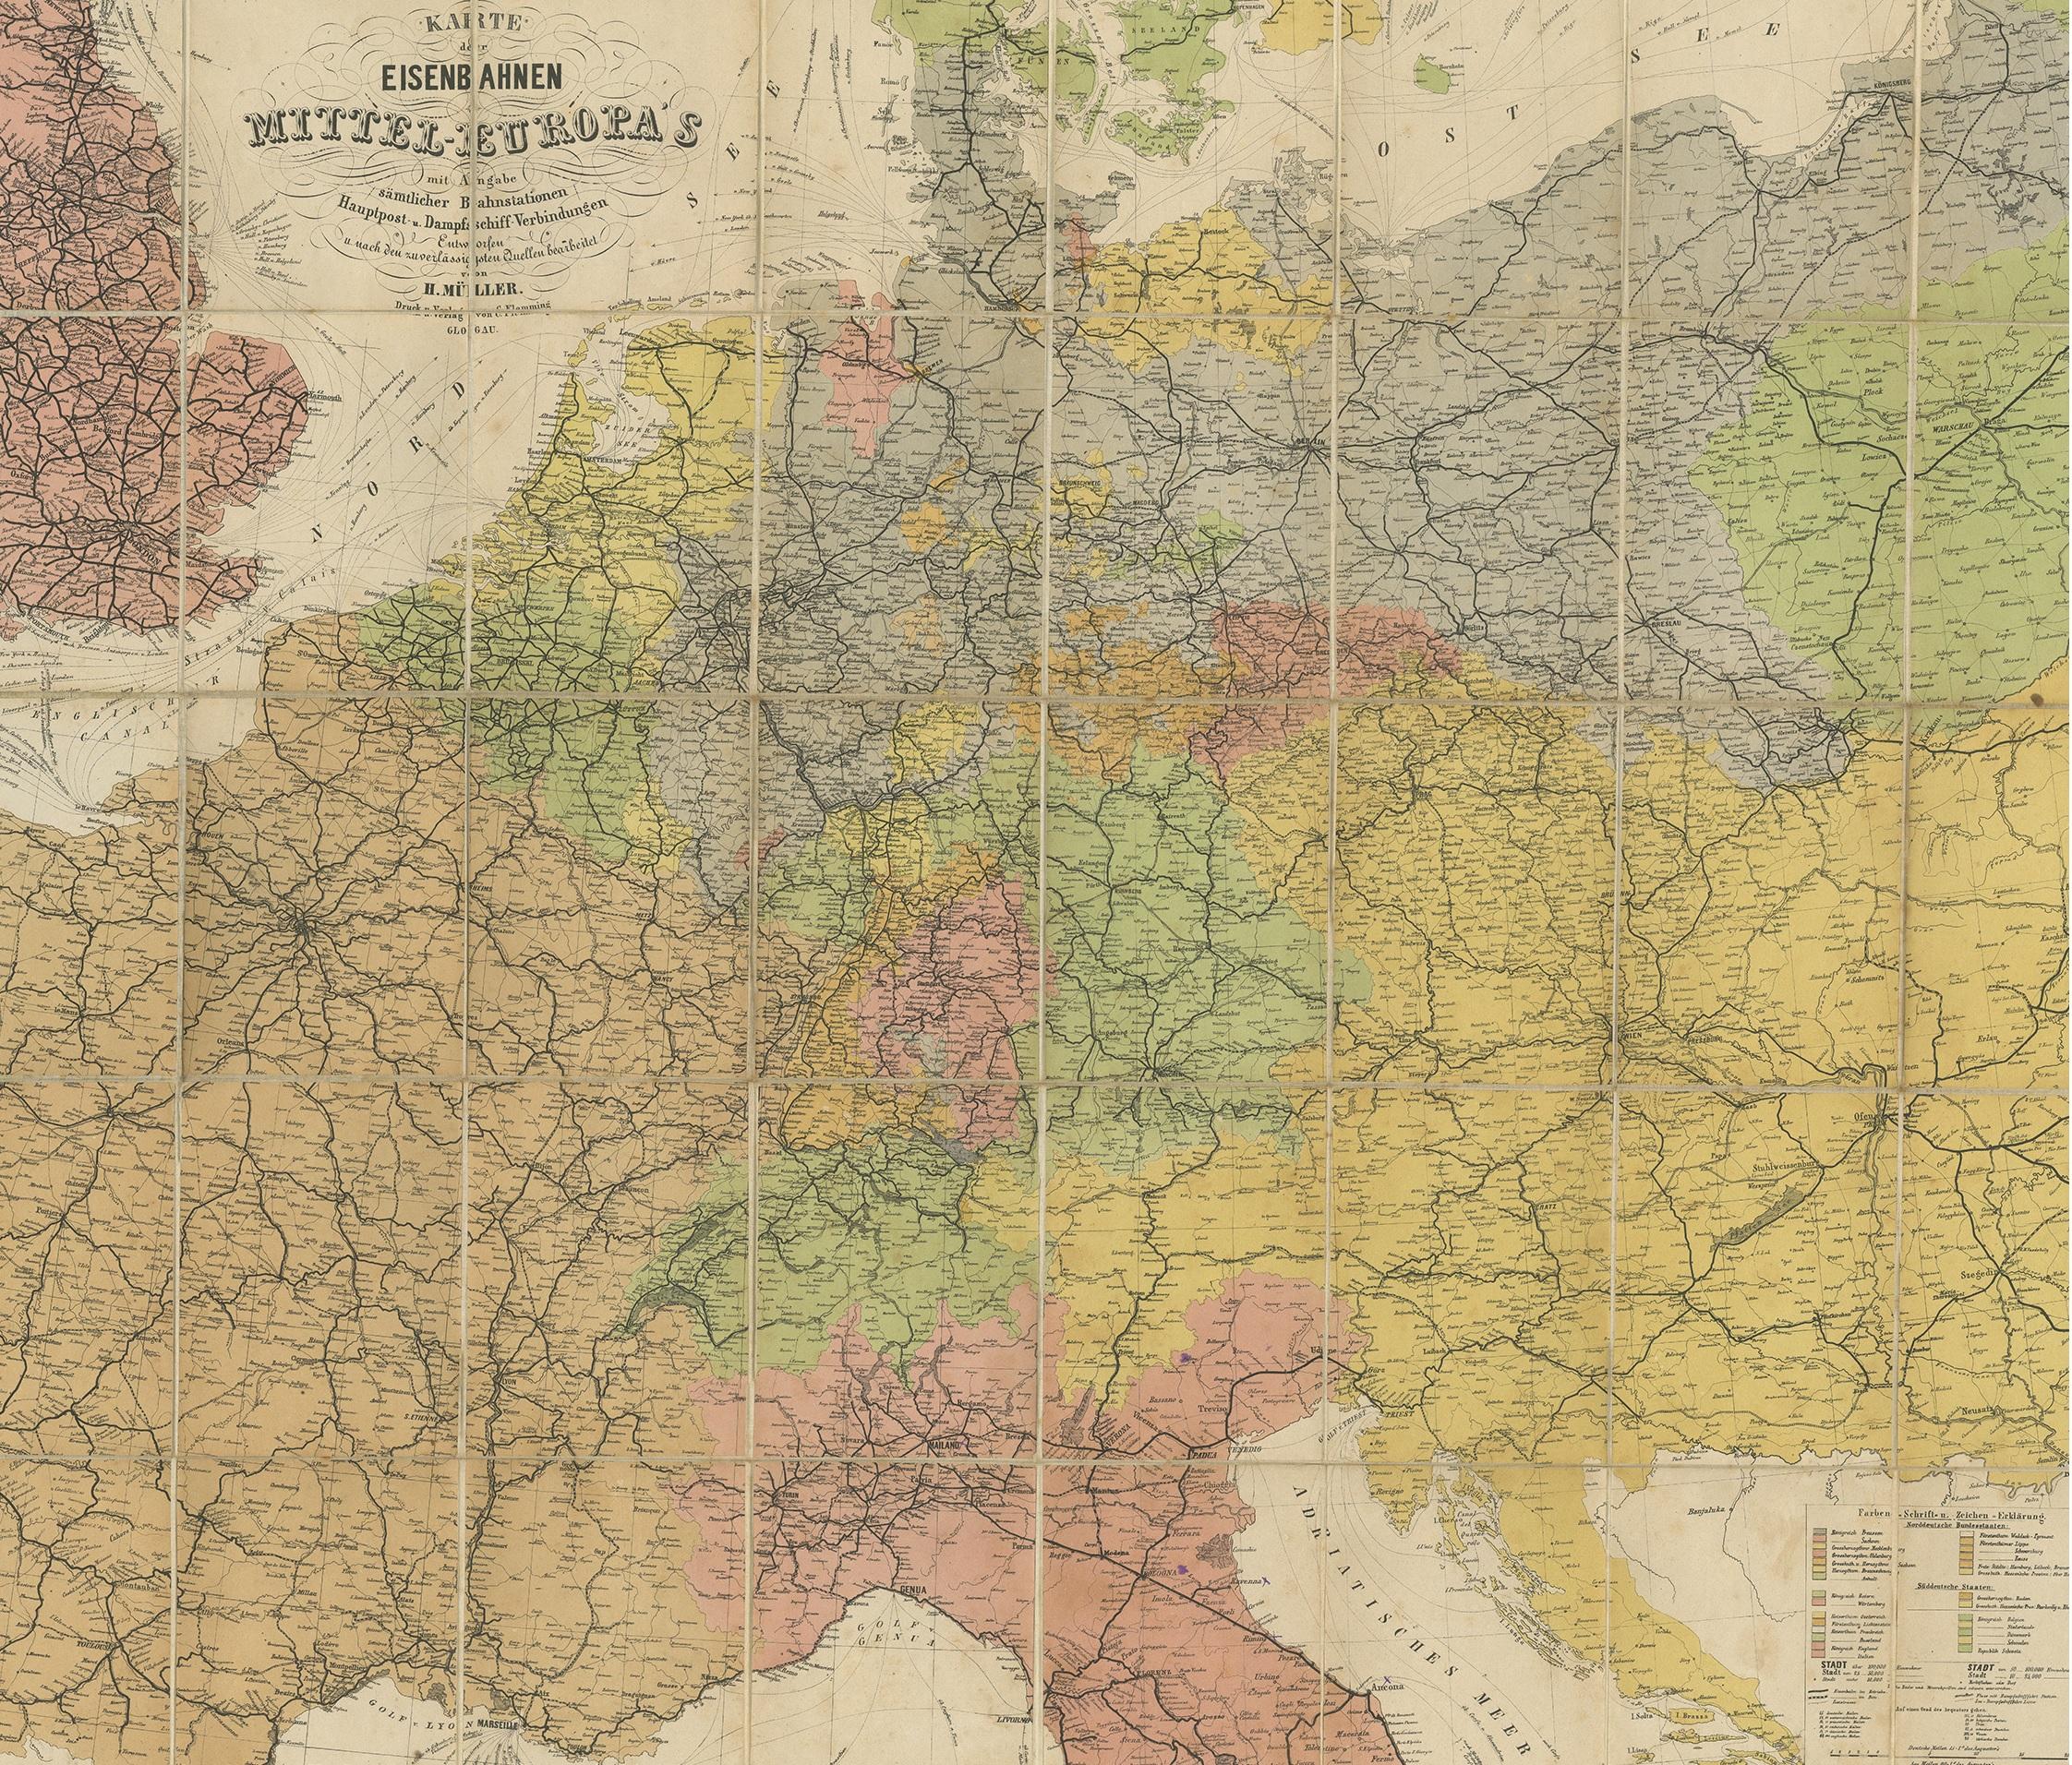 Antique map titled 'Karte der Eisenbahnen Mittel-Europa's (..)'. Railway folding map of Central Europe. Published by Carl Flemming, 1870.